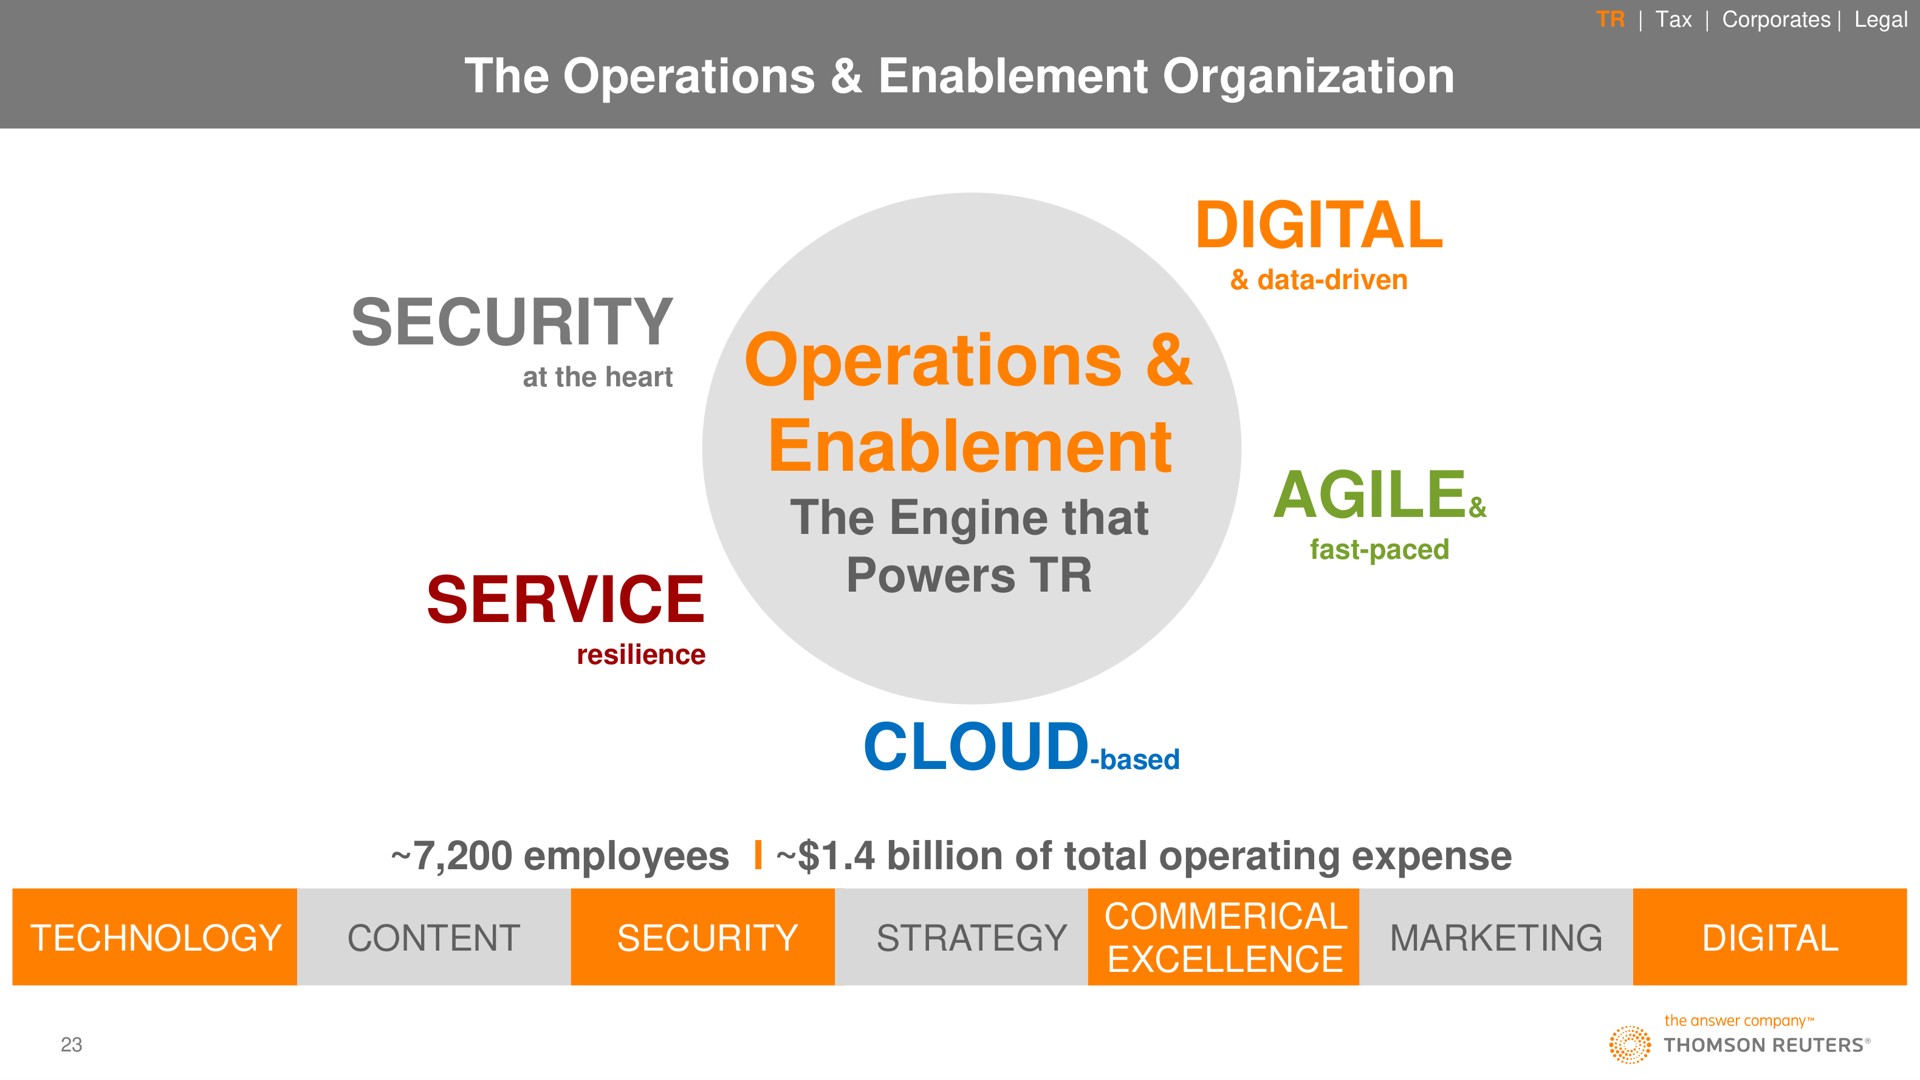 the operations enablement organization digital operations enablement the engine that powers agile security service employees i billion of total operating expense fast paced see | Thomson Reuters